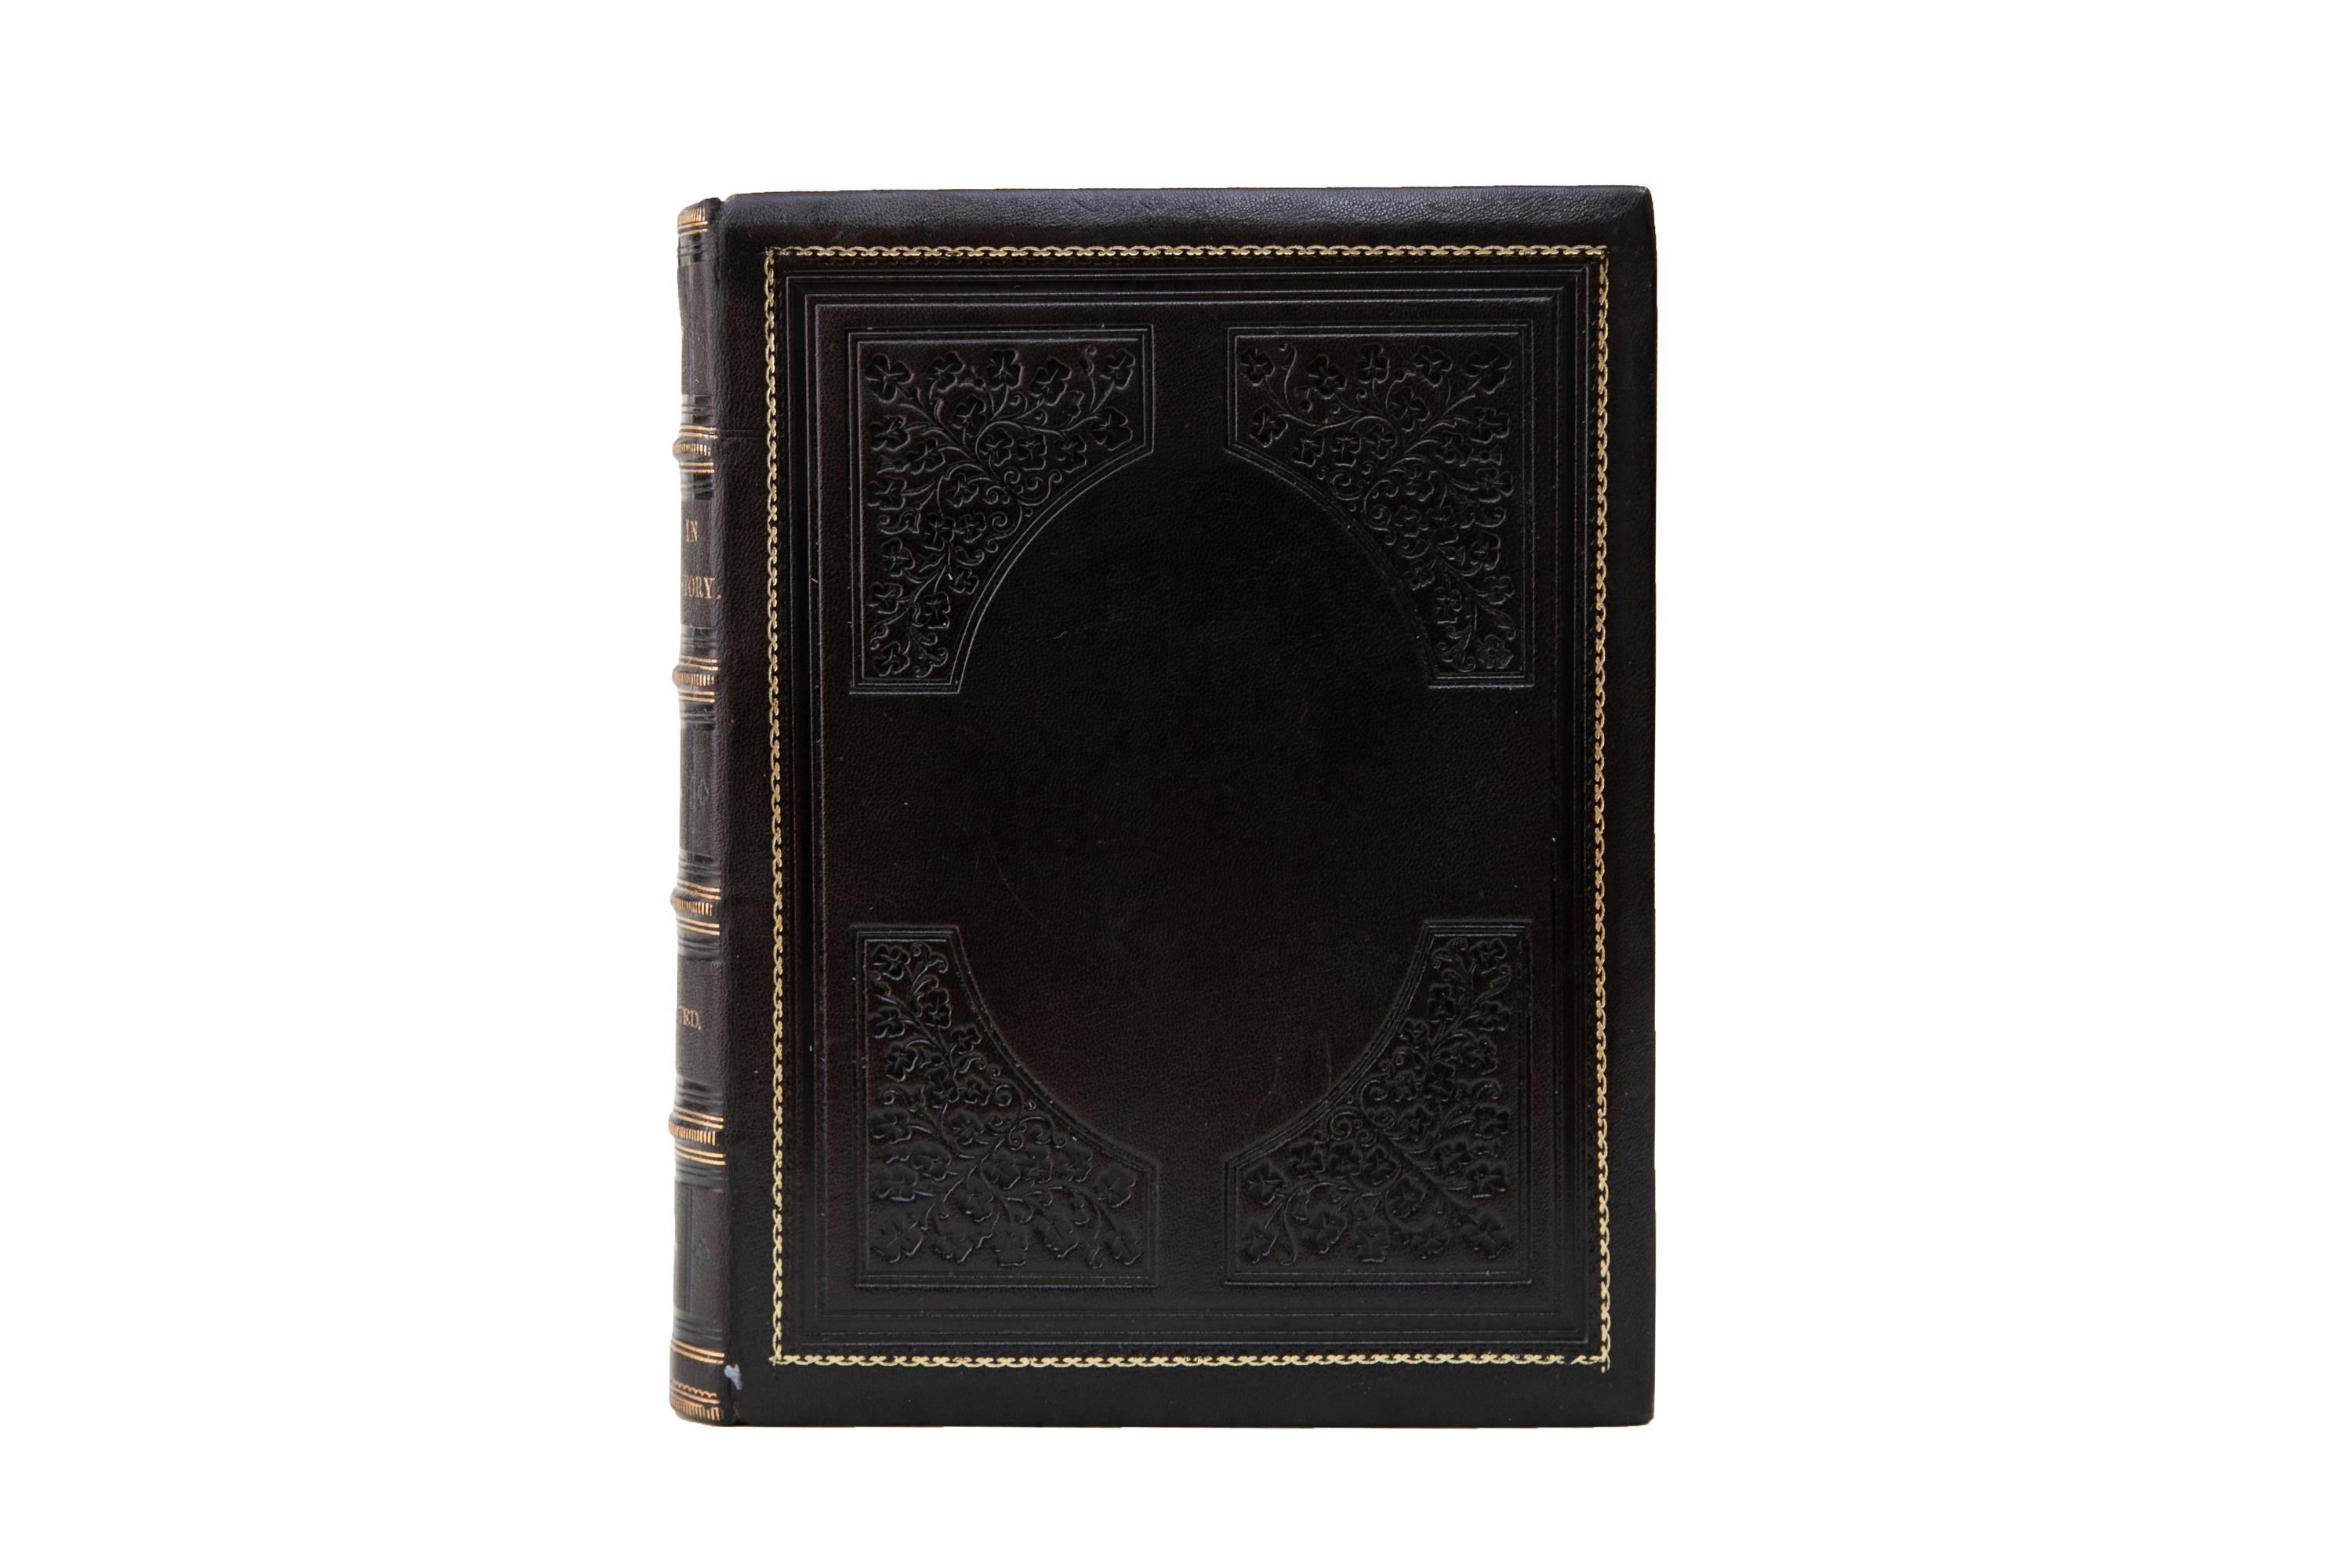 1 Volume. Harriet Beecher Stowe, Women in Sacred History. Bound in full brown morocco with the cover displaying a gilt-tooled border and open-tooled floral corner details. The spines display raised bands, panel details, and label lettering, all